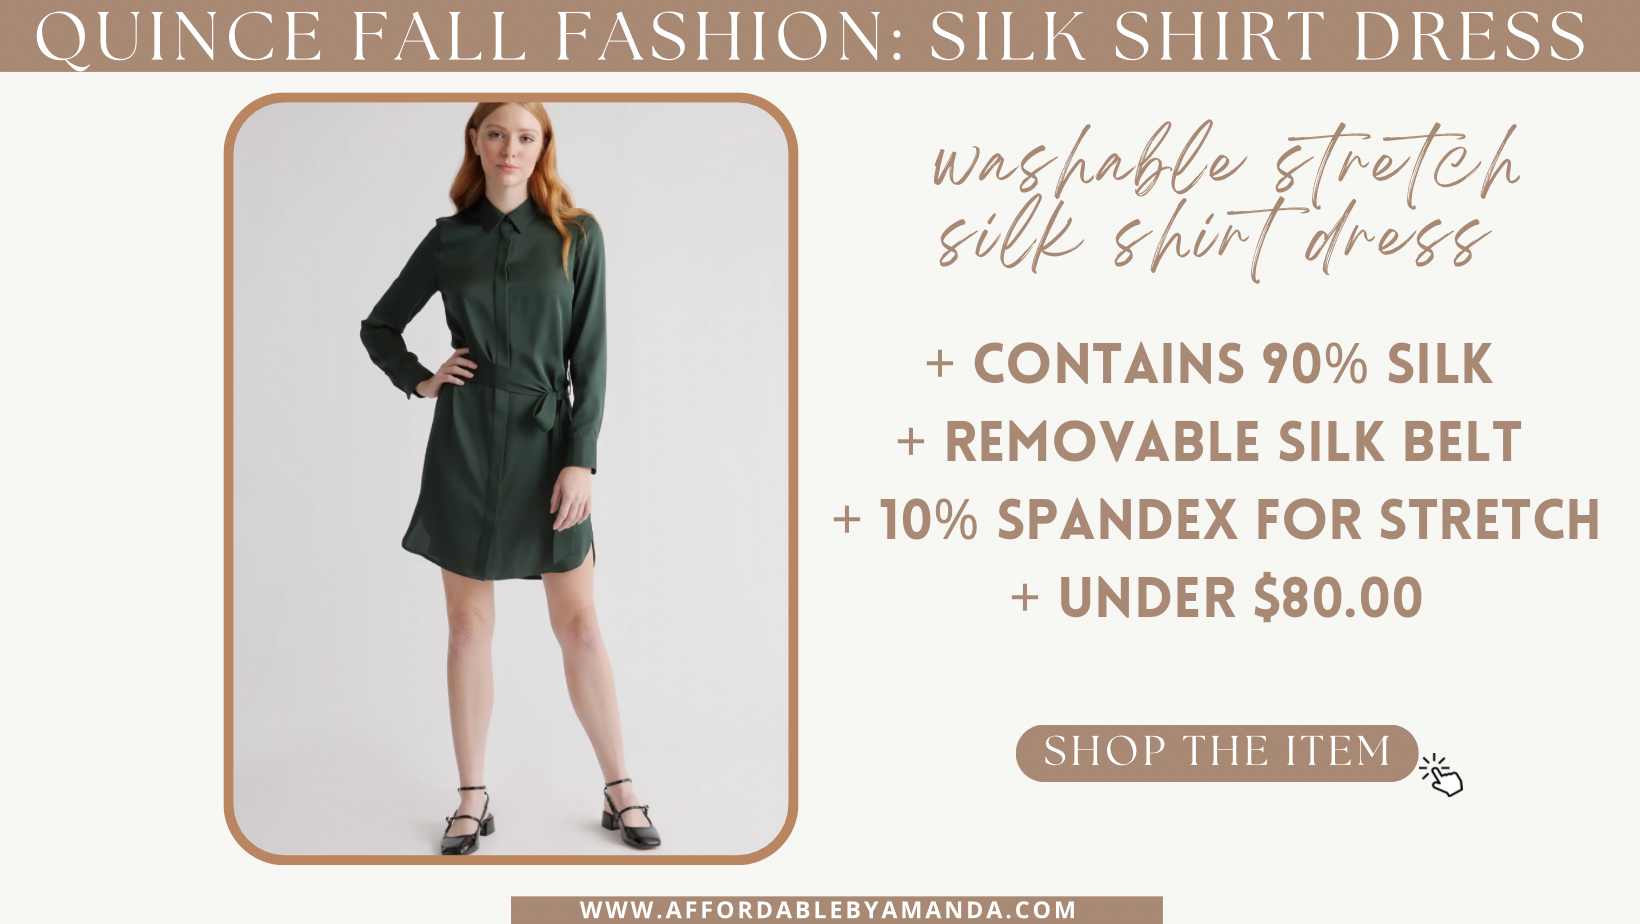 Quince Washable Stretch Silk Shirt Dress | Affordable by Amanda